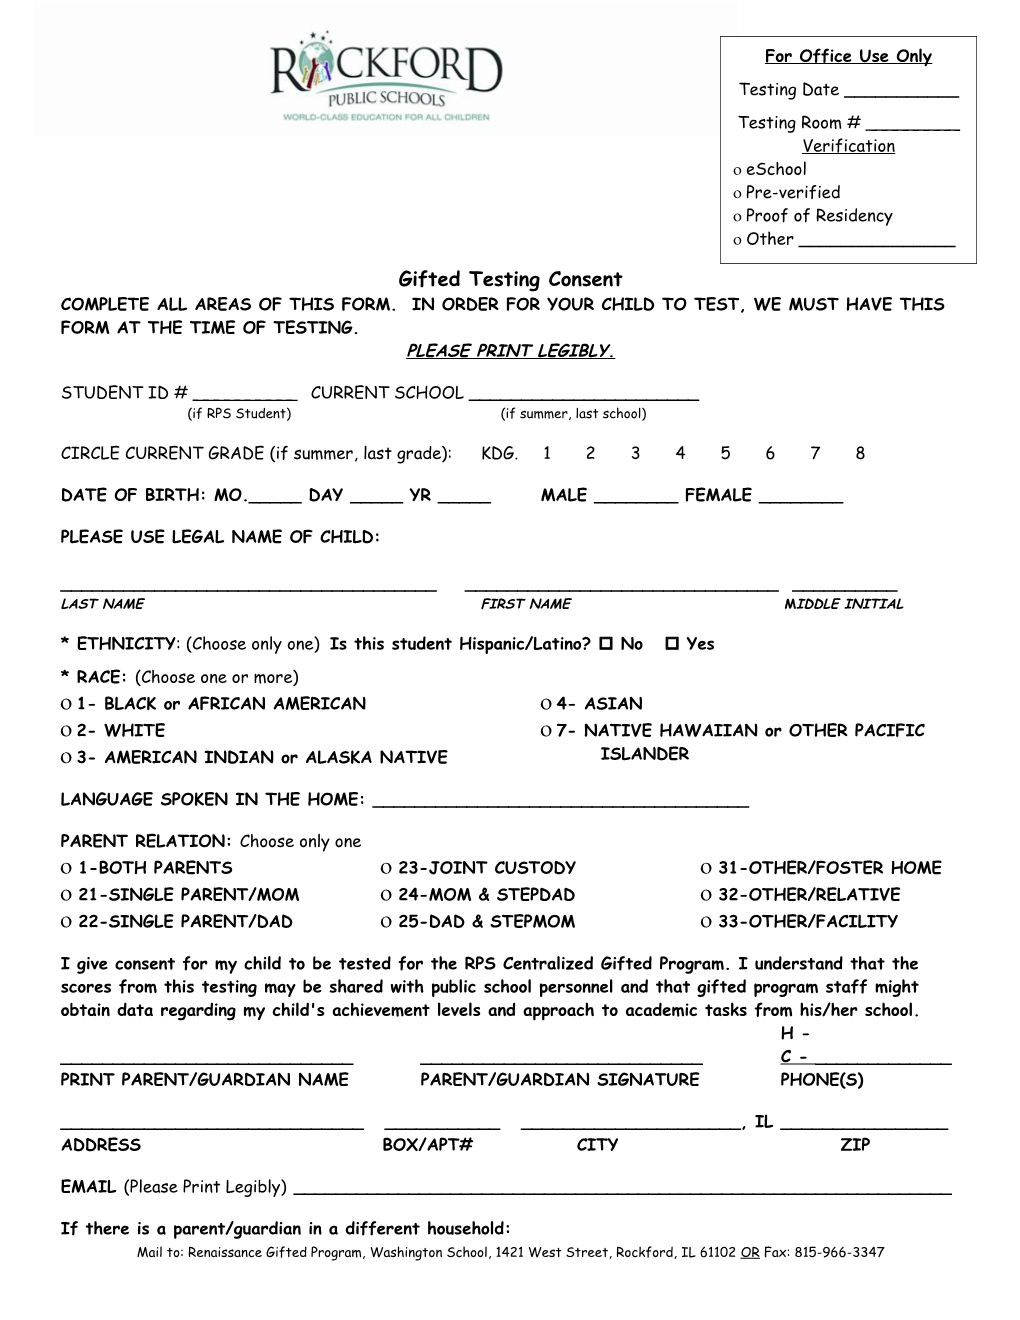 Complete All Areas of This Form. in Order for Your Child to Test, We Must Have This Form